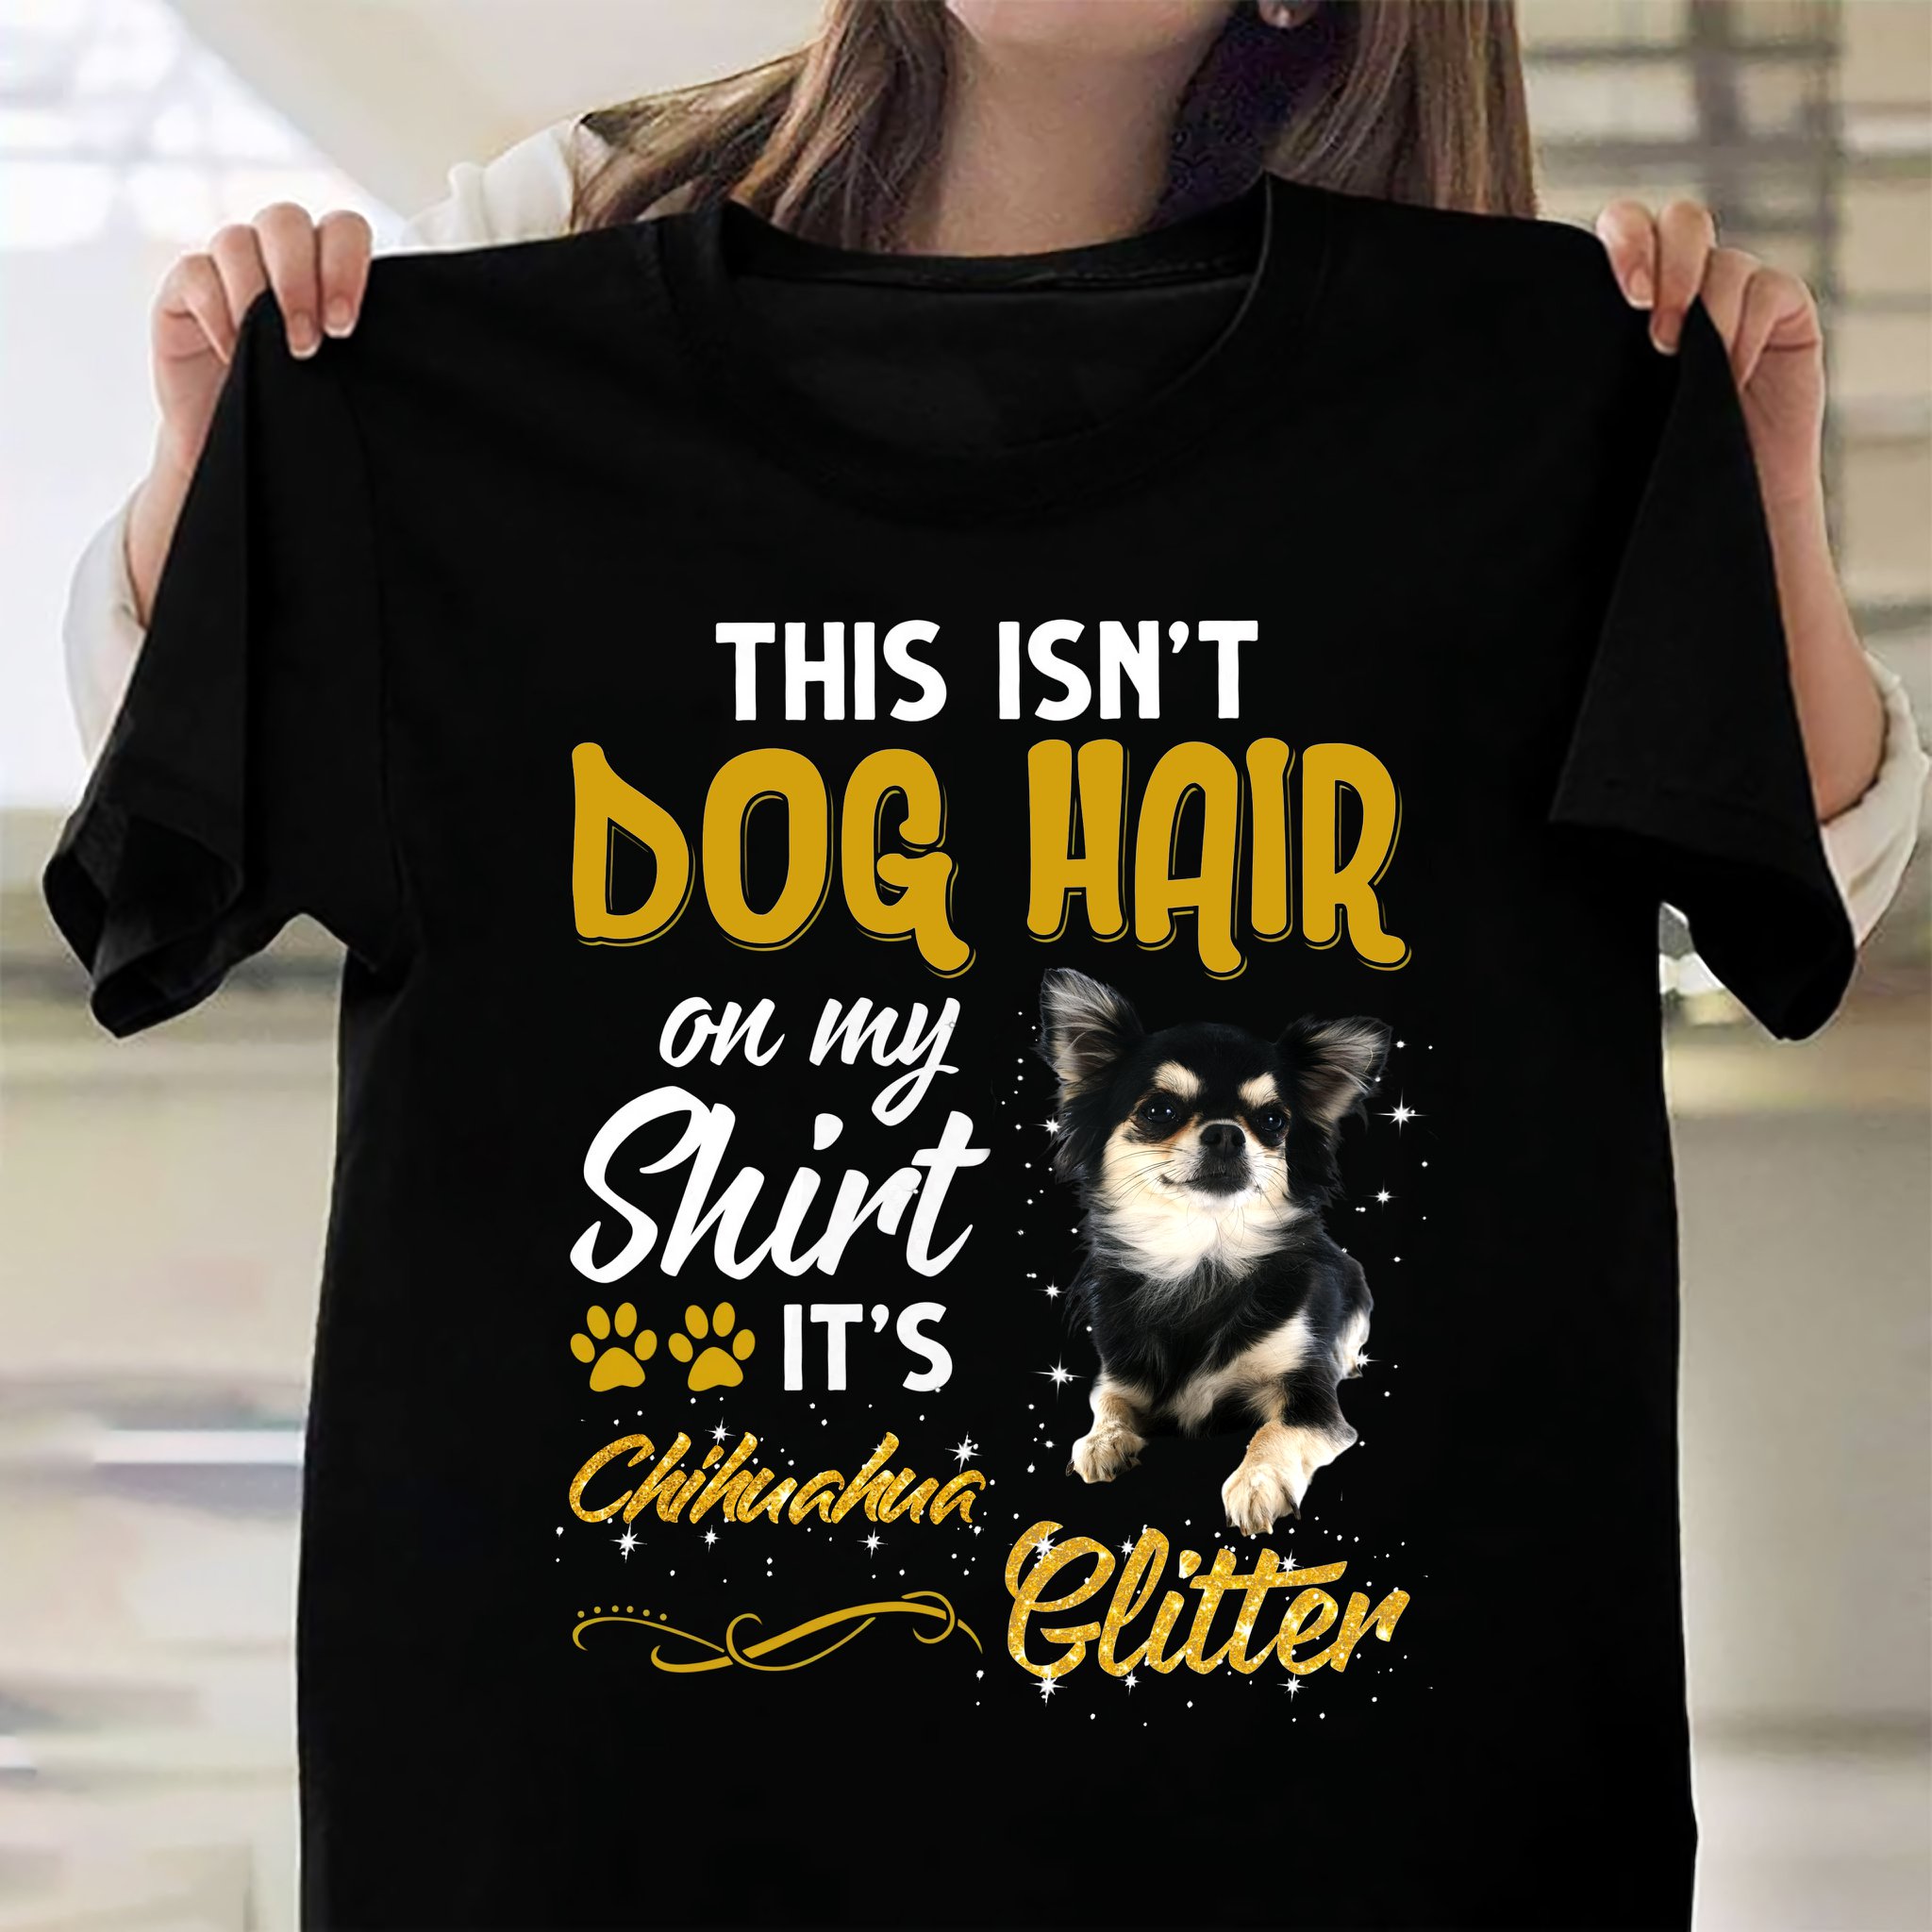 This isn't dog hair on my shirt - It's Chihuahua glitter, Chihuahua dog lover